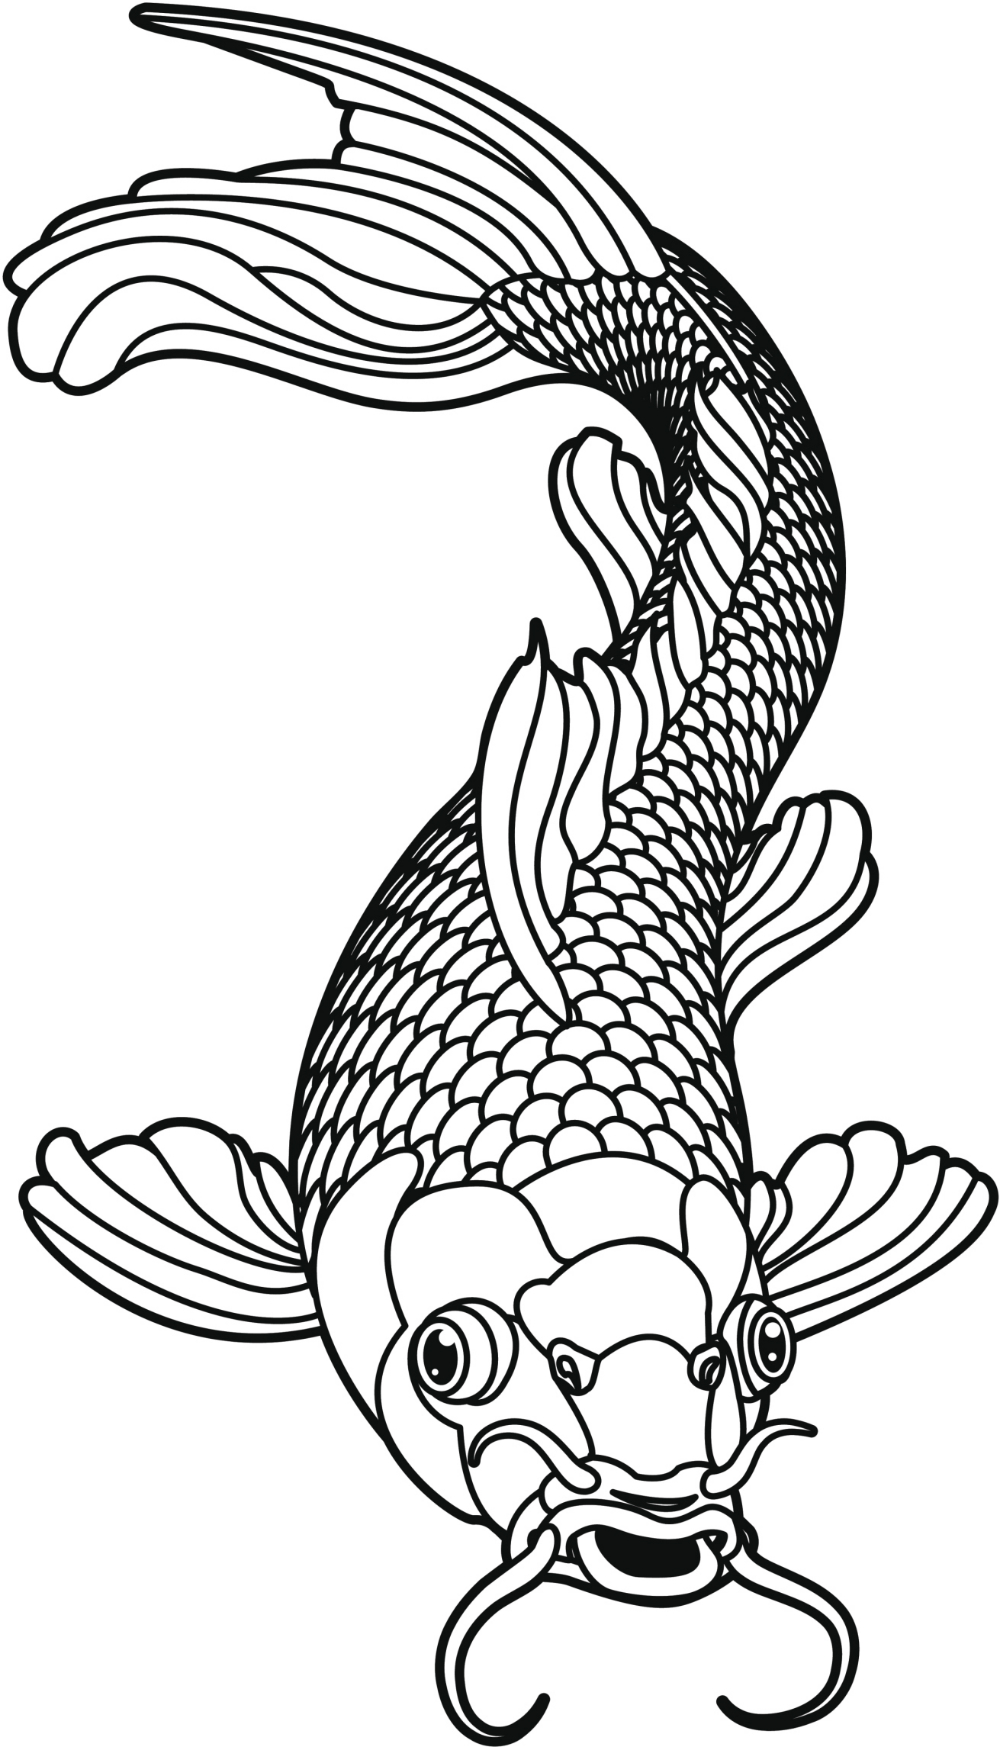 Koi Fish Coloring Page, Google Image Result for http://fc05.deviantart